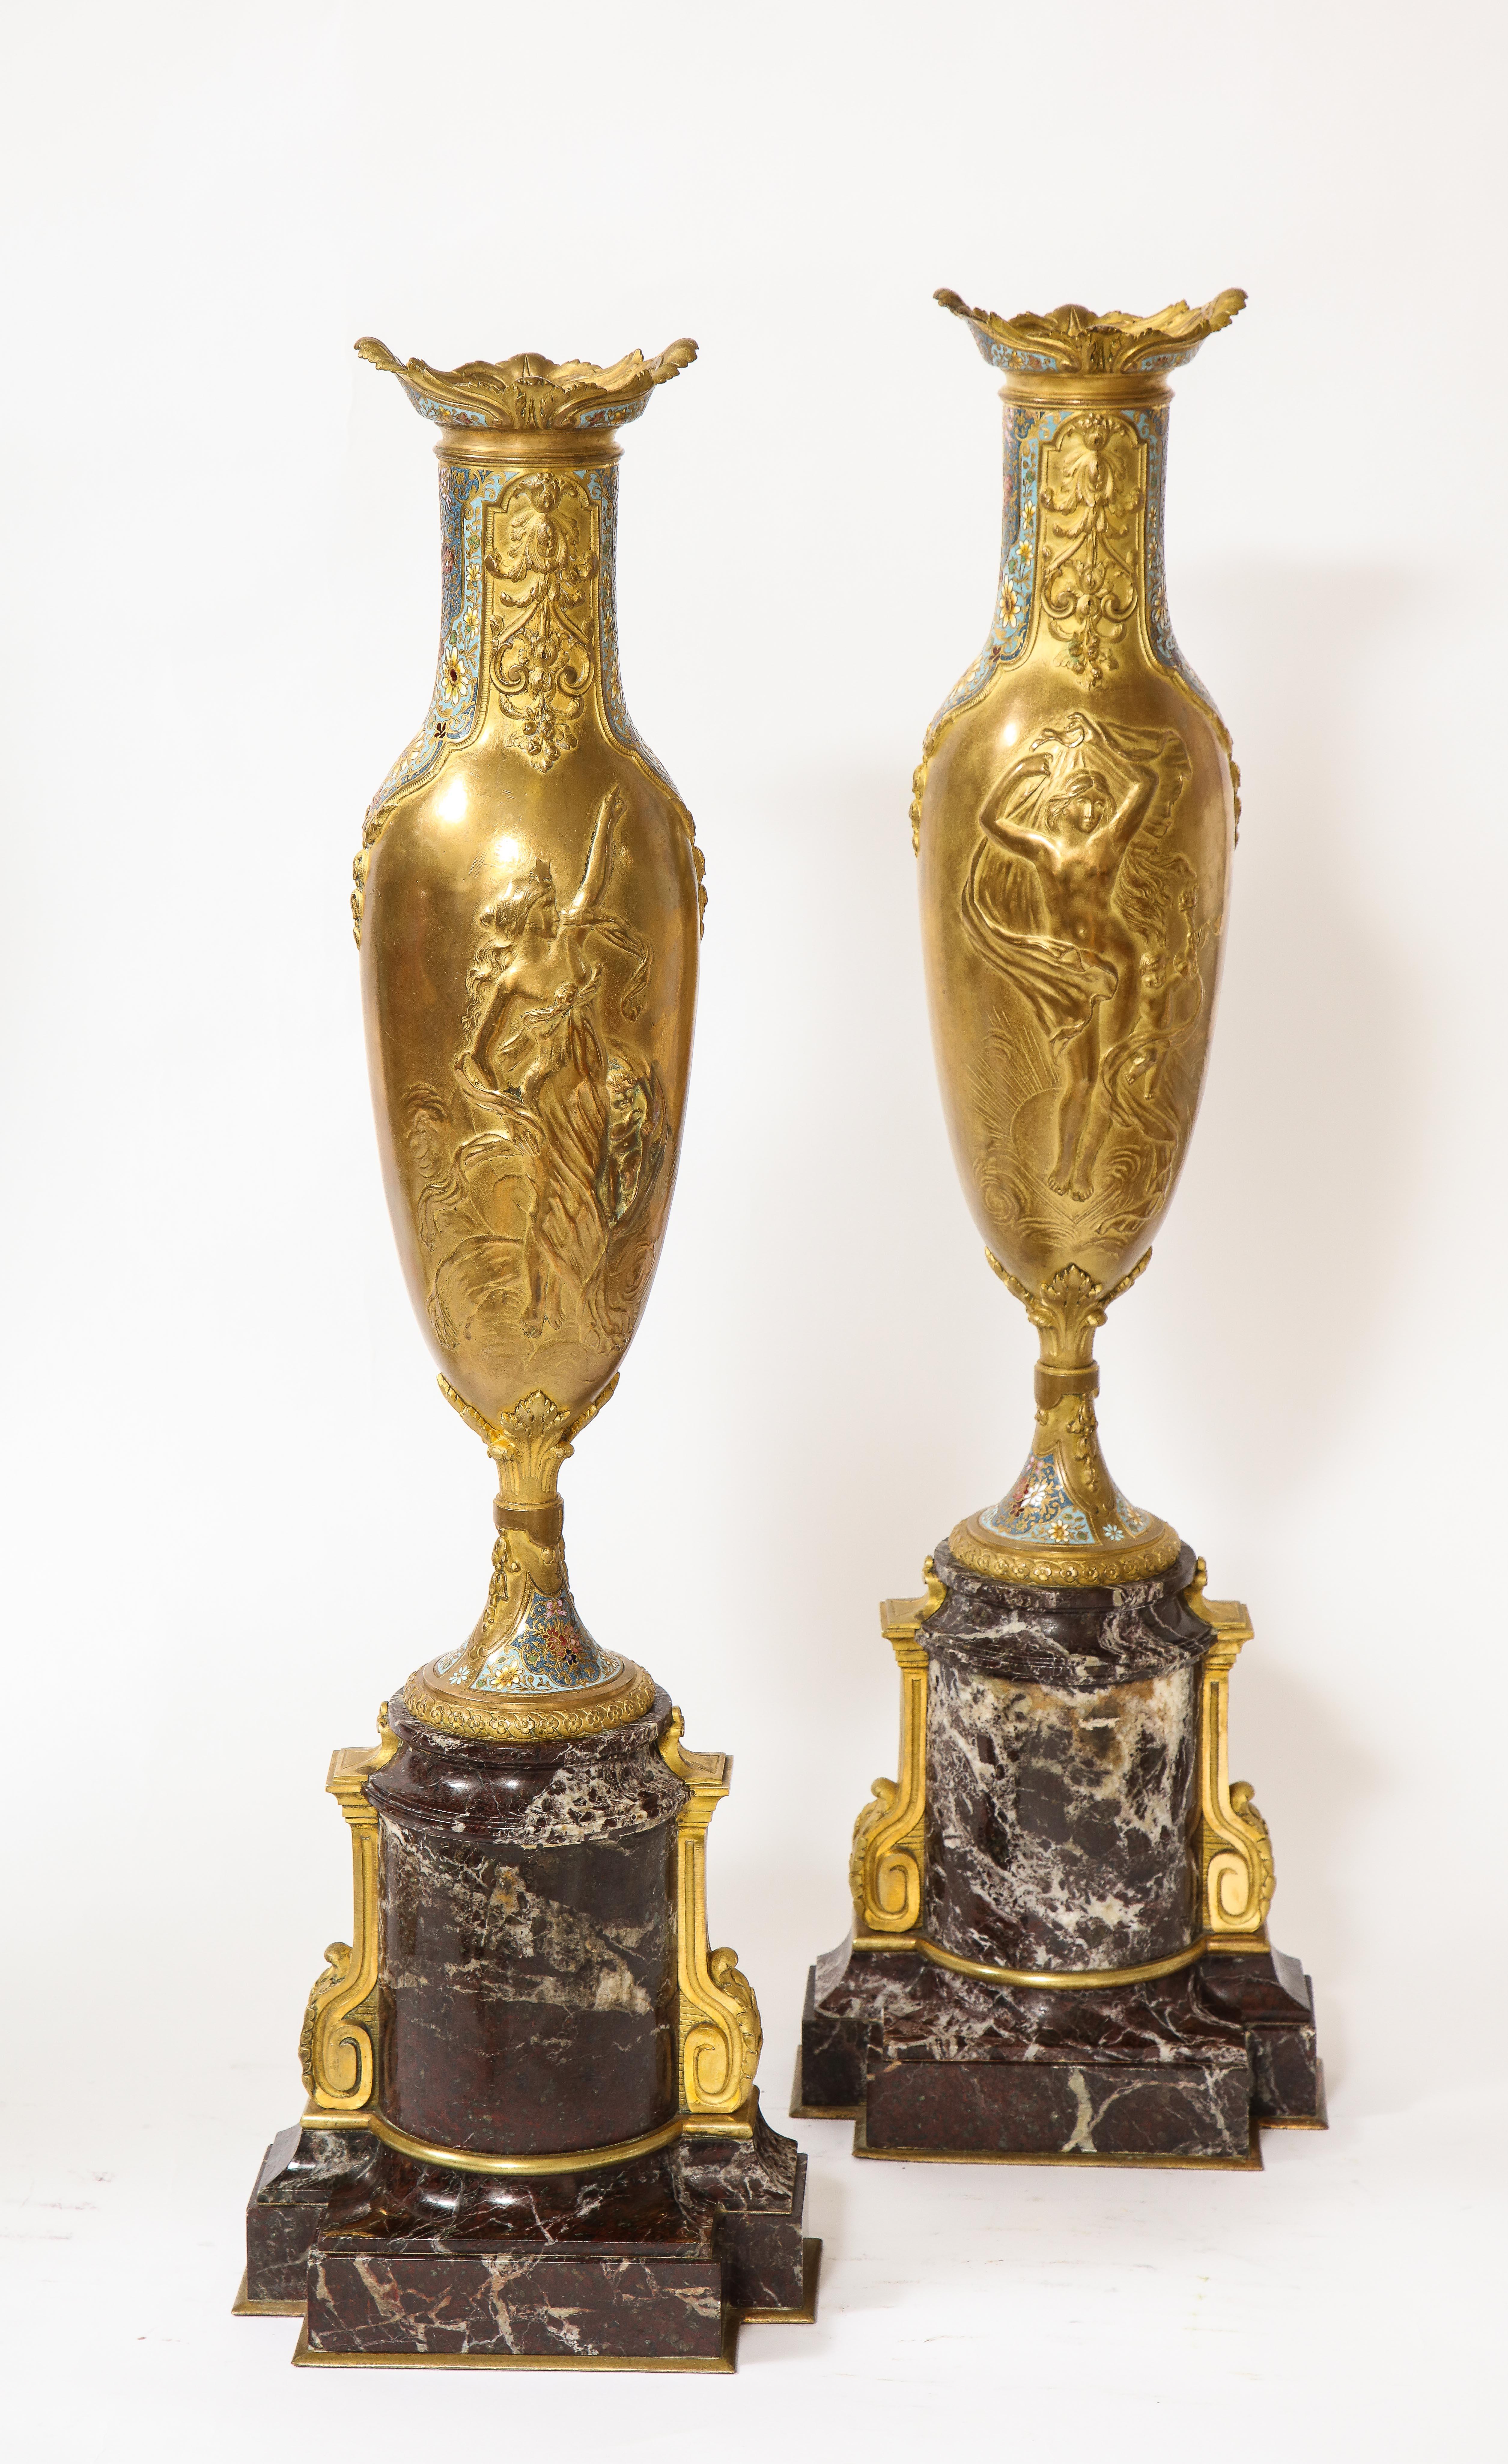 A Pair of French 19th century Louis XVI style Dore bronze, Champlevé Enamel, and rouge marble mounted 'Day and Night' Vases. Each vase is beautifully cast, hand-chased, and hand-chiseled with meticulous detail. On each of the vases are relief images